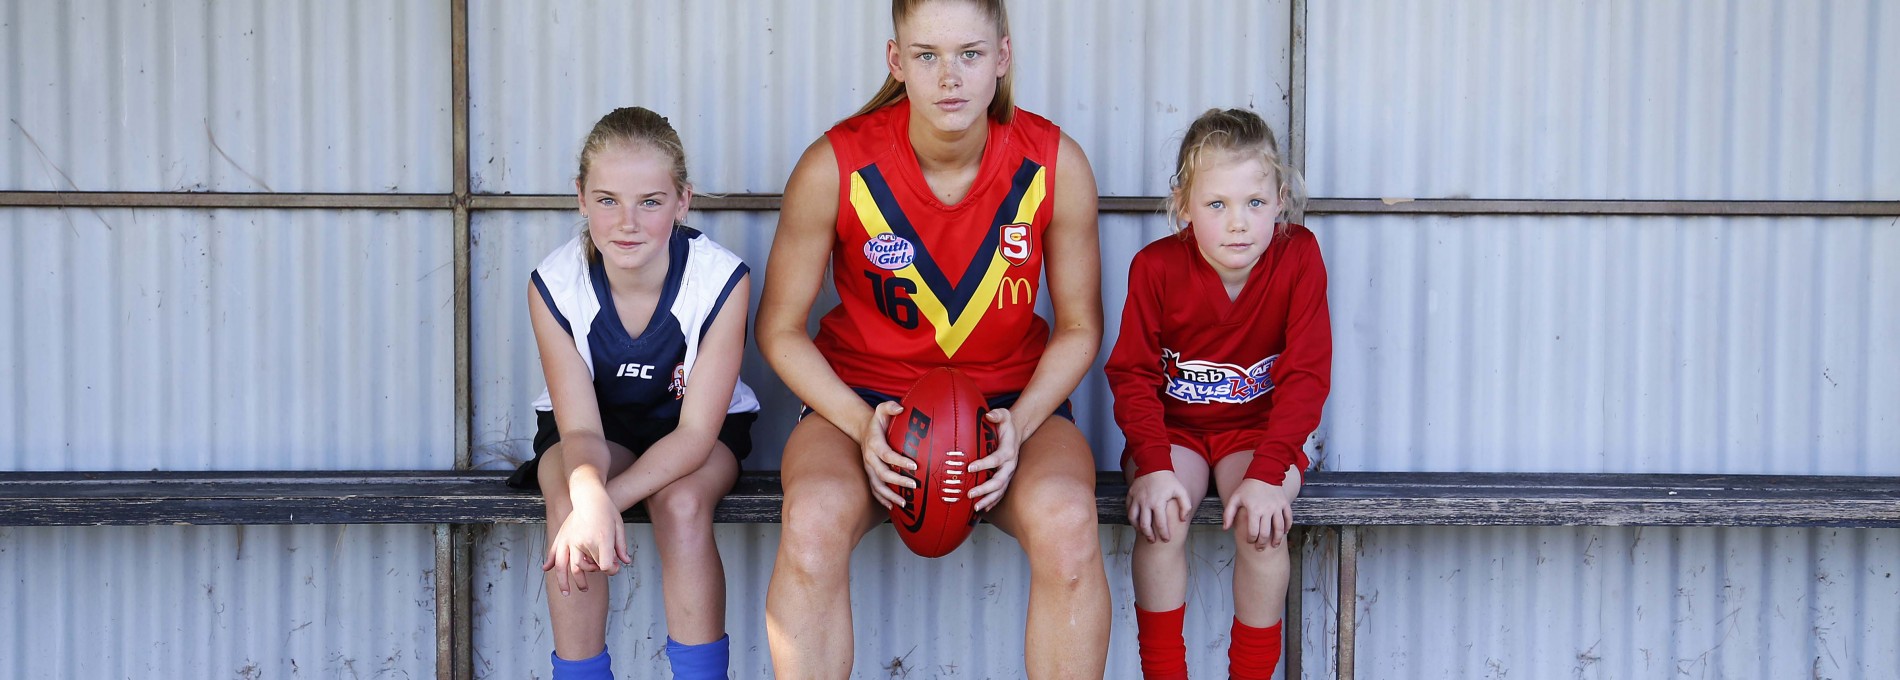 Three Girls in AFL Uniforms on Bench Beneath Corrugated Steel Shelter